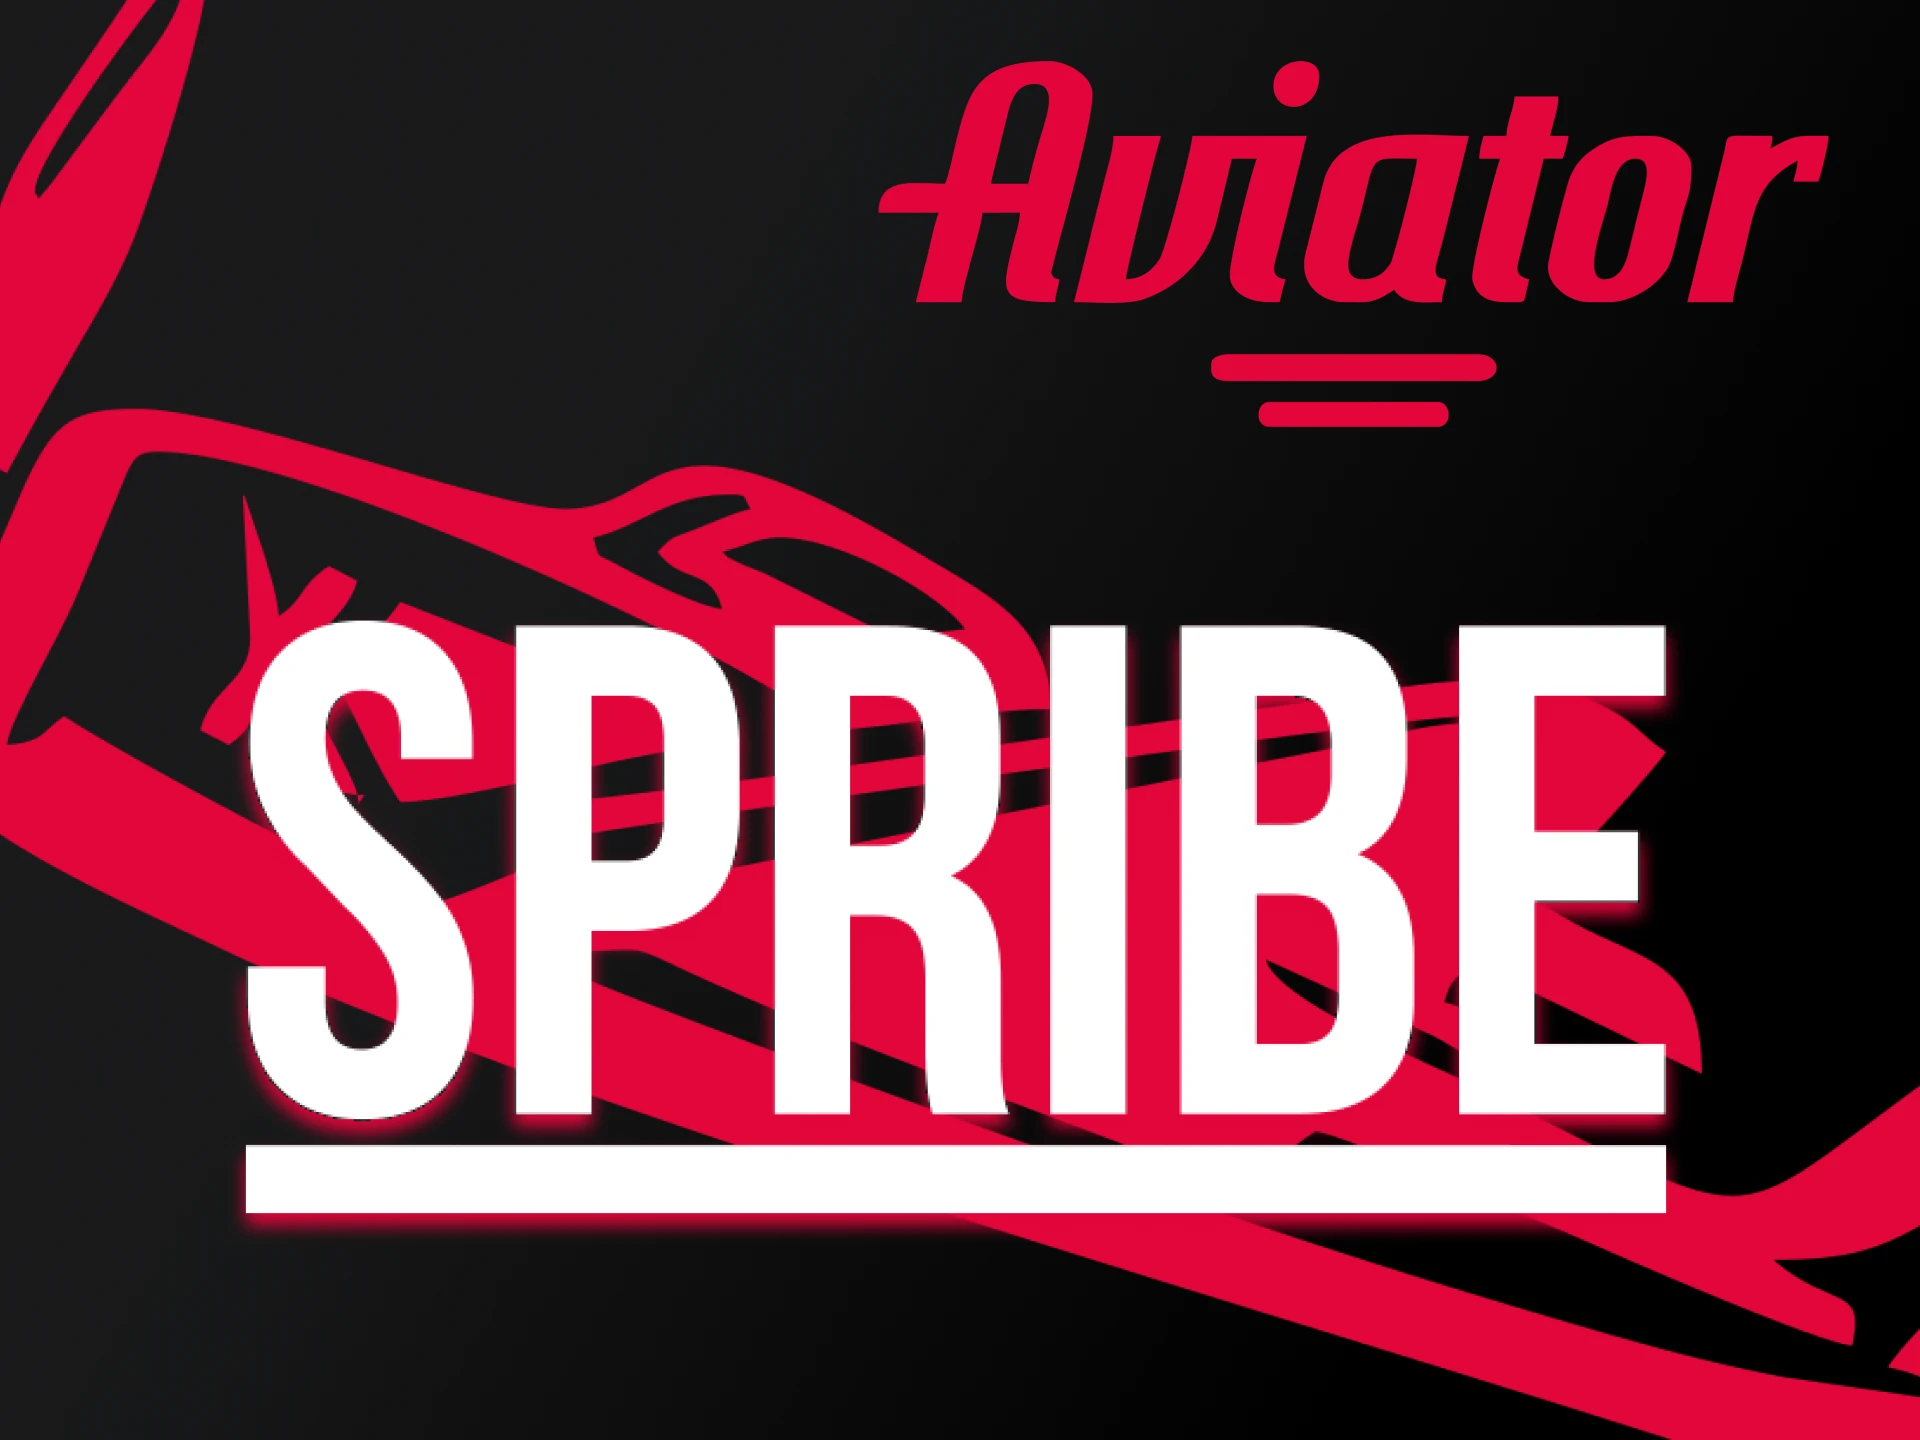 Learn more about Aviator's official gaming provider, Spribe.